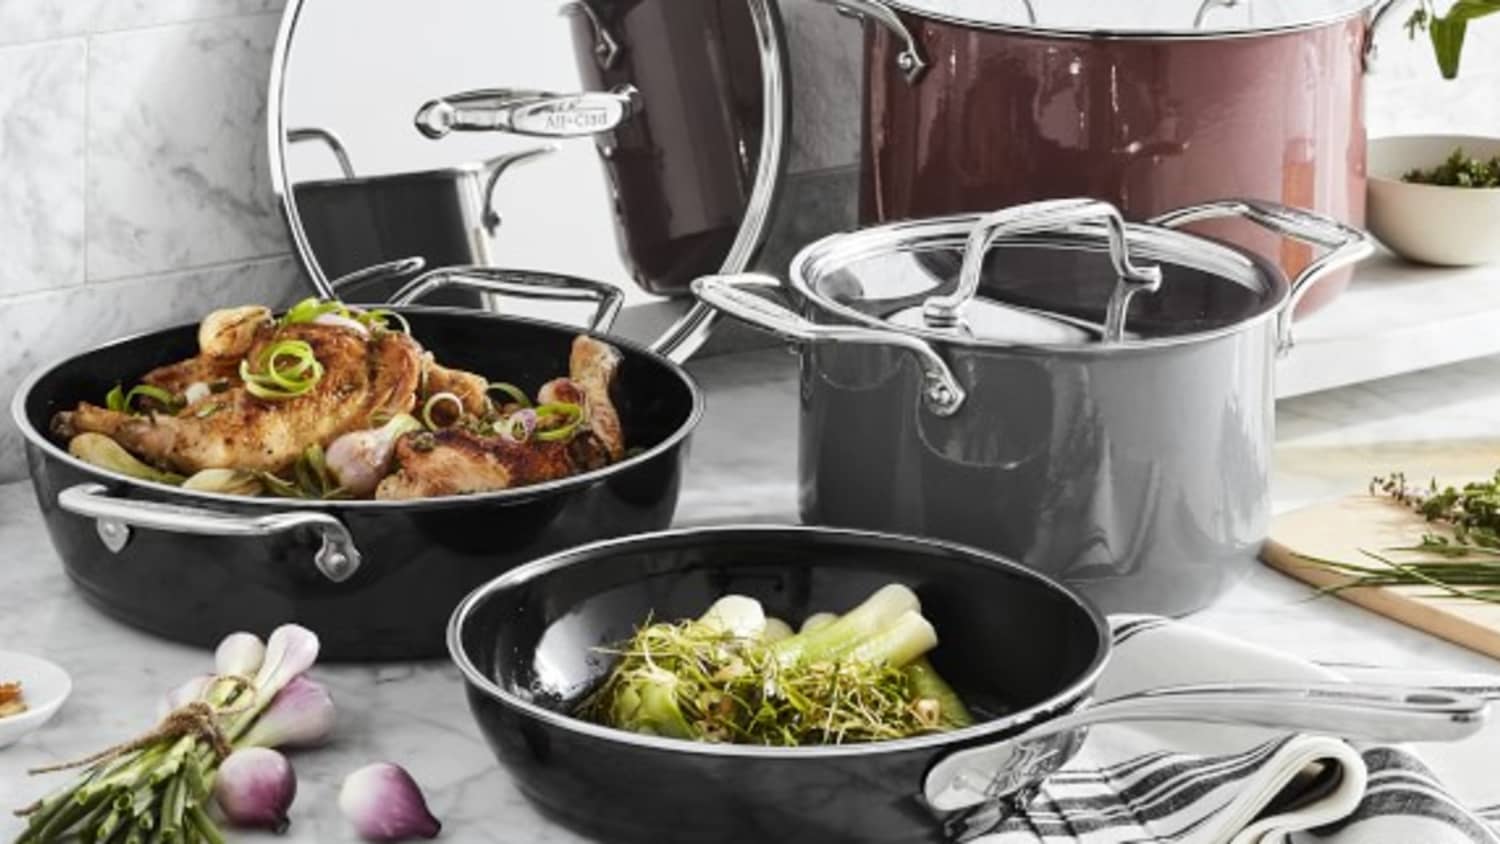 All-Clad pots and pans: Save up to 71% on All-Clad cookware